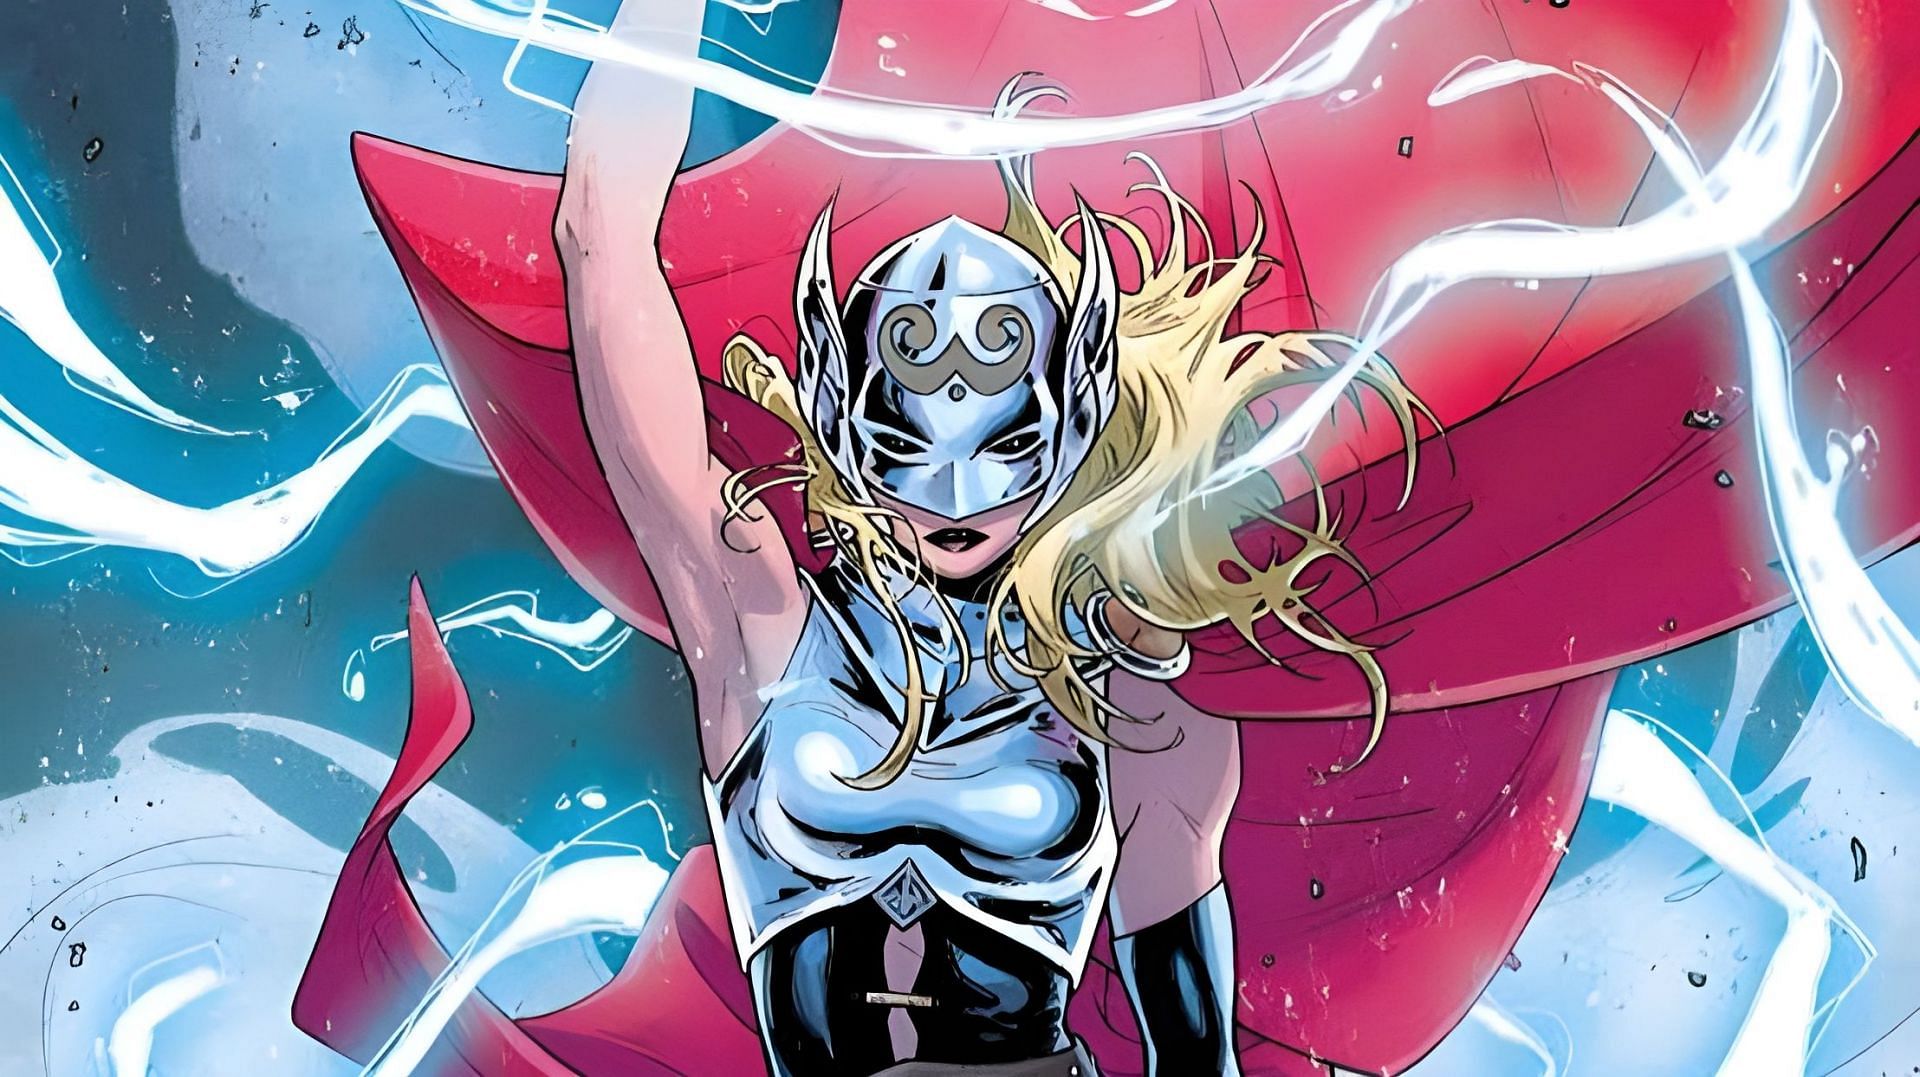 Jane Foster as the Mighty Thor (Image via Marvel Comics)